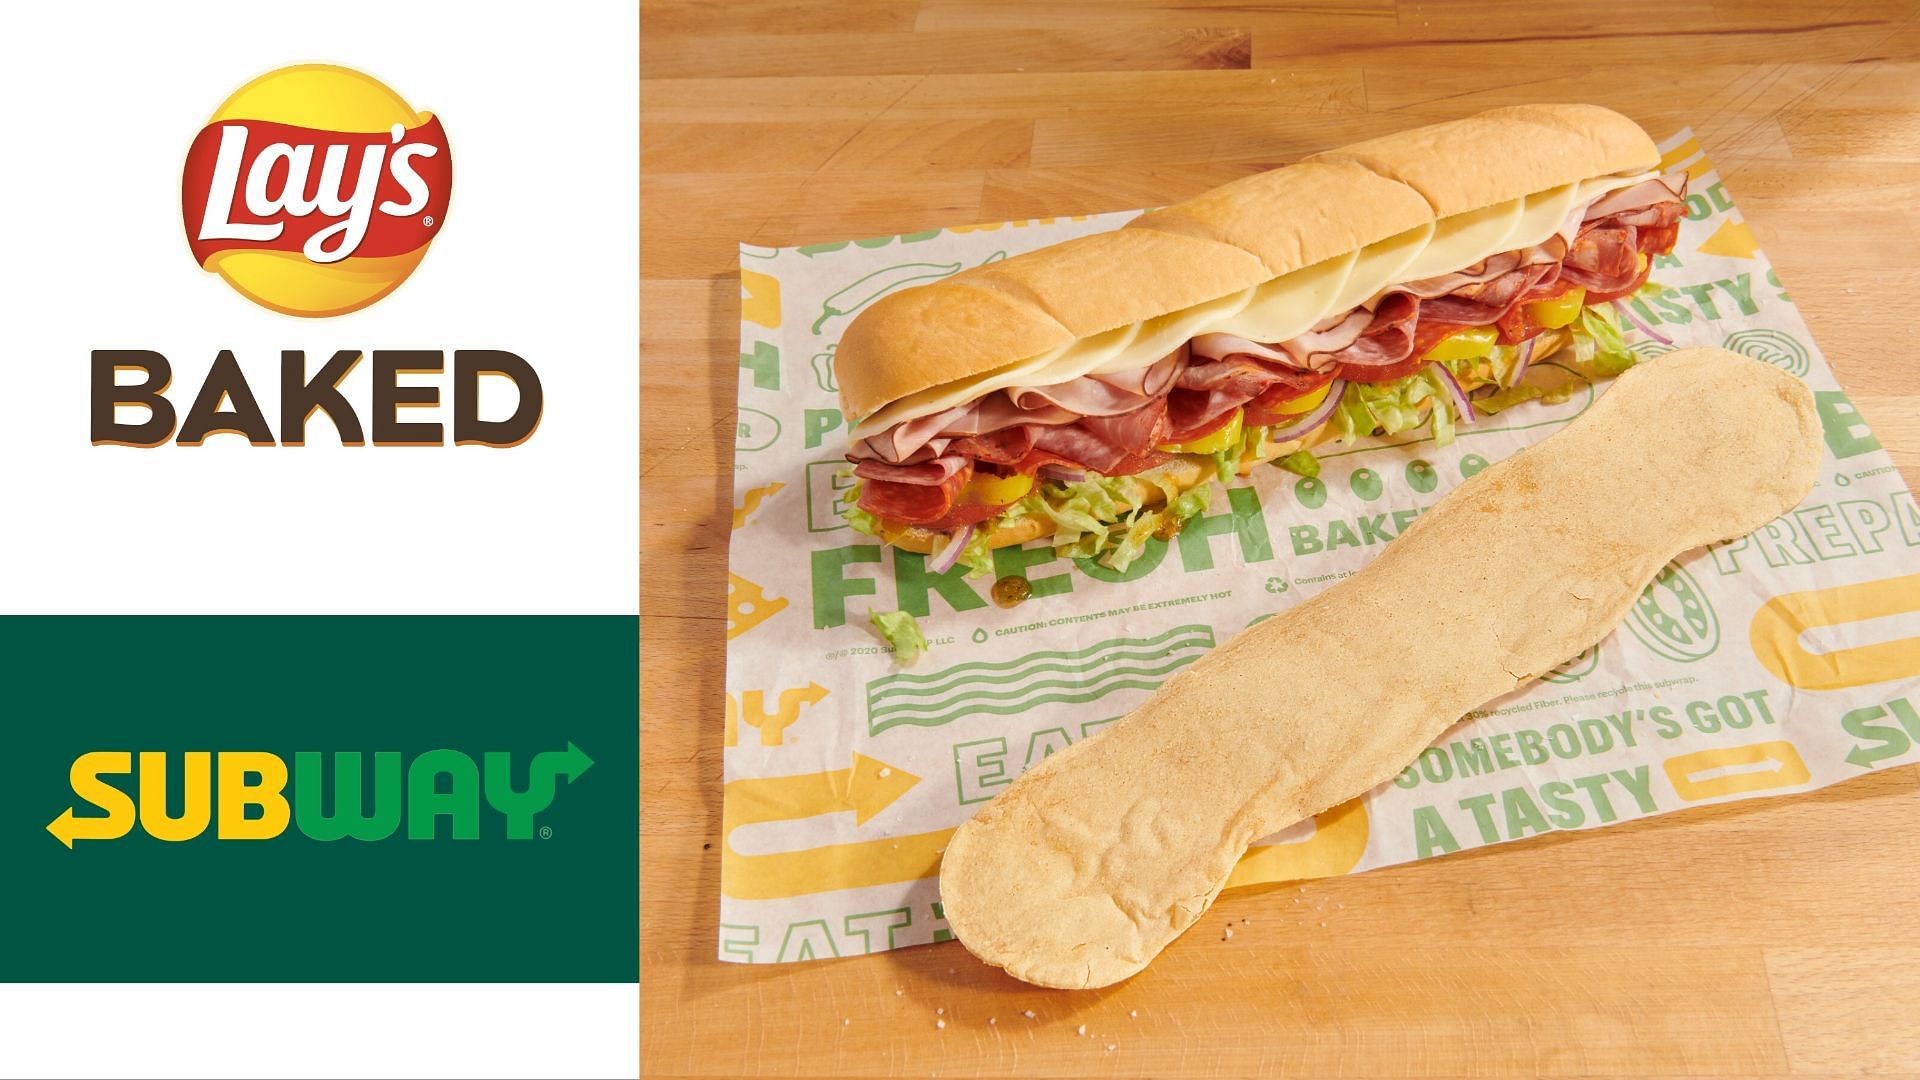 Subway is offering a new 12-inch long BAKED Lay